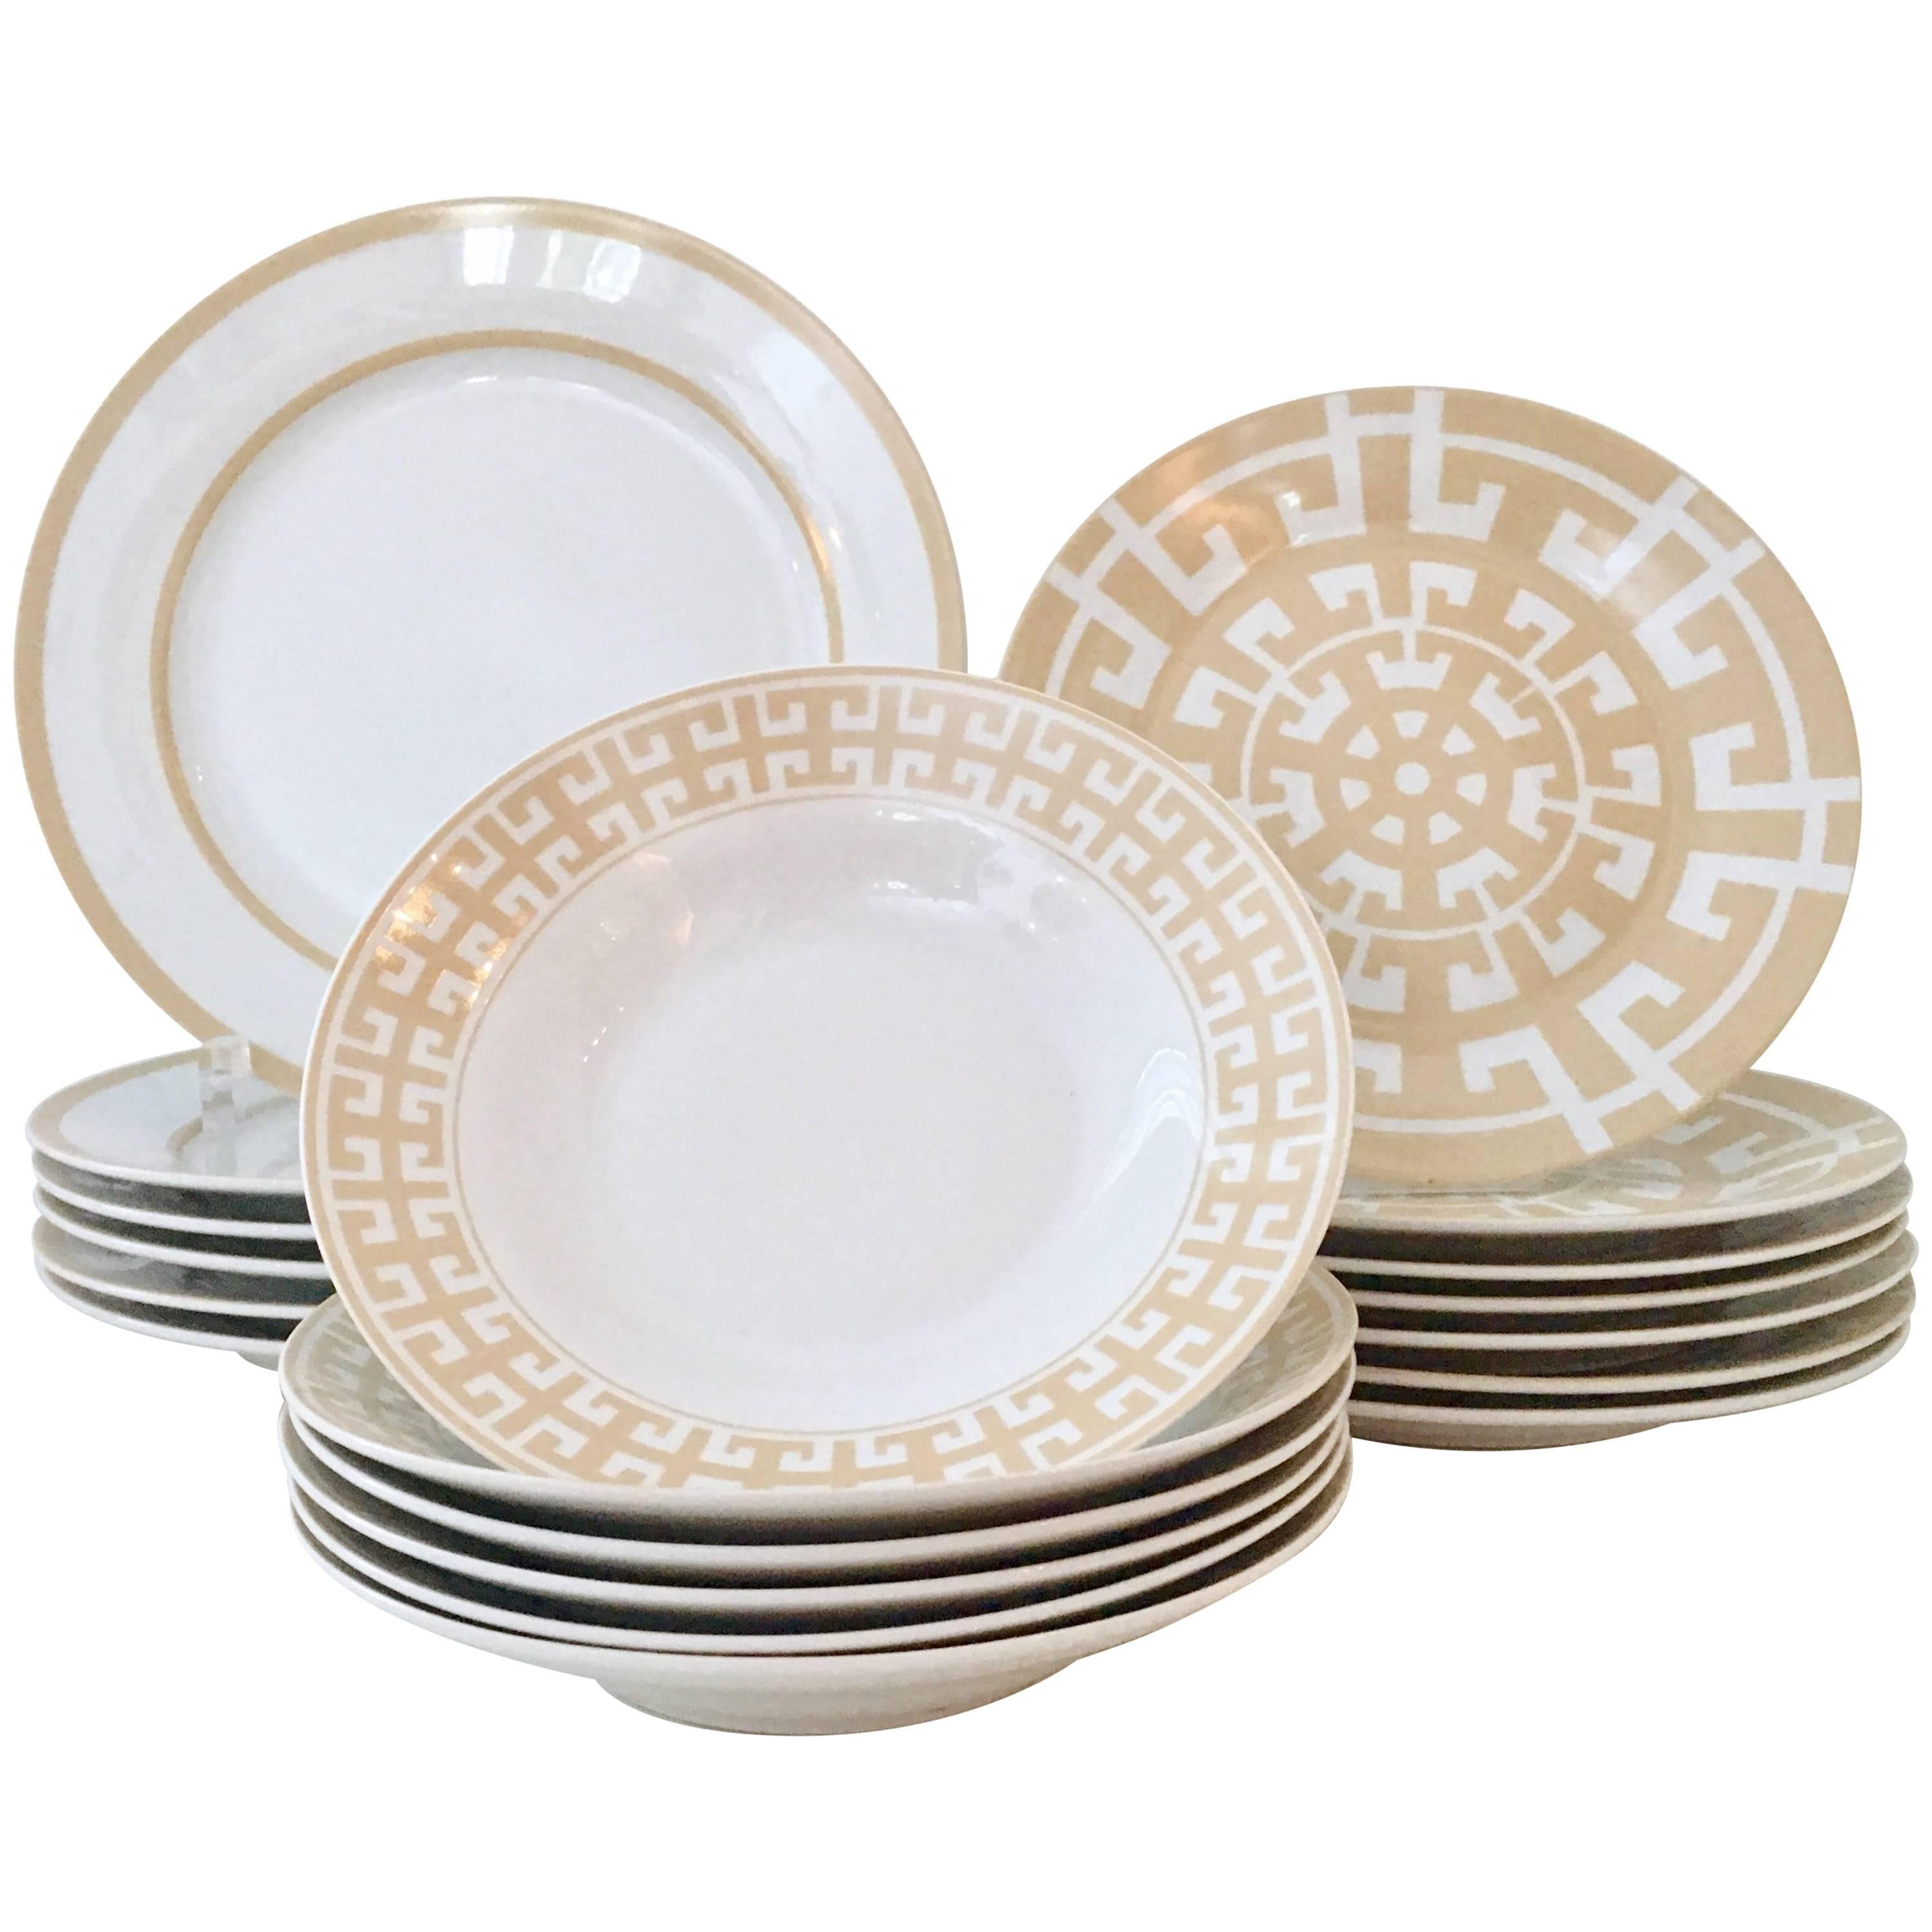 21st Century Modern Hermes Style Geometric Dinnerware By, Colin Cowie S/21 For Sale